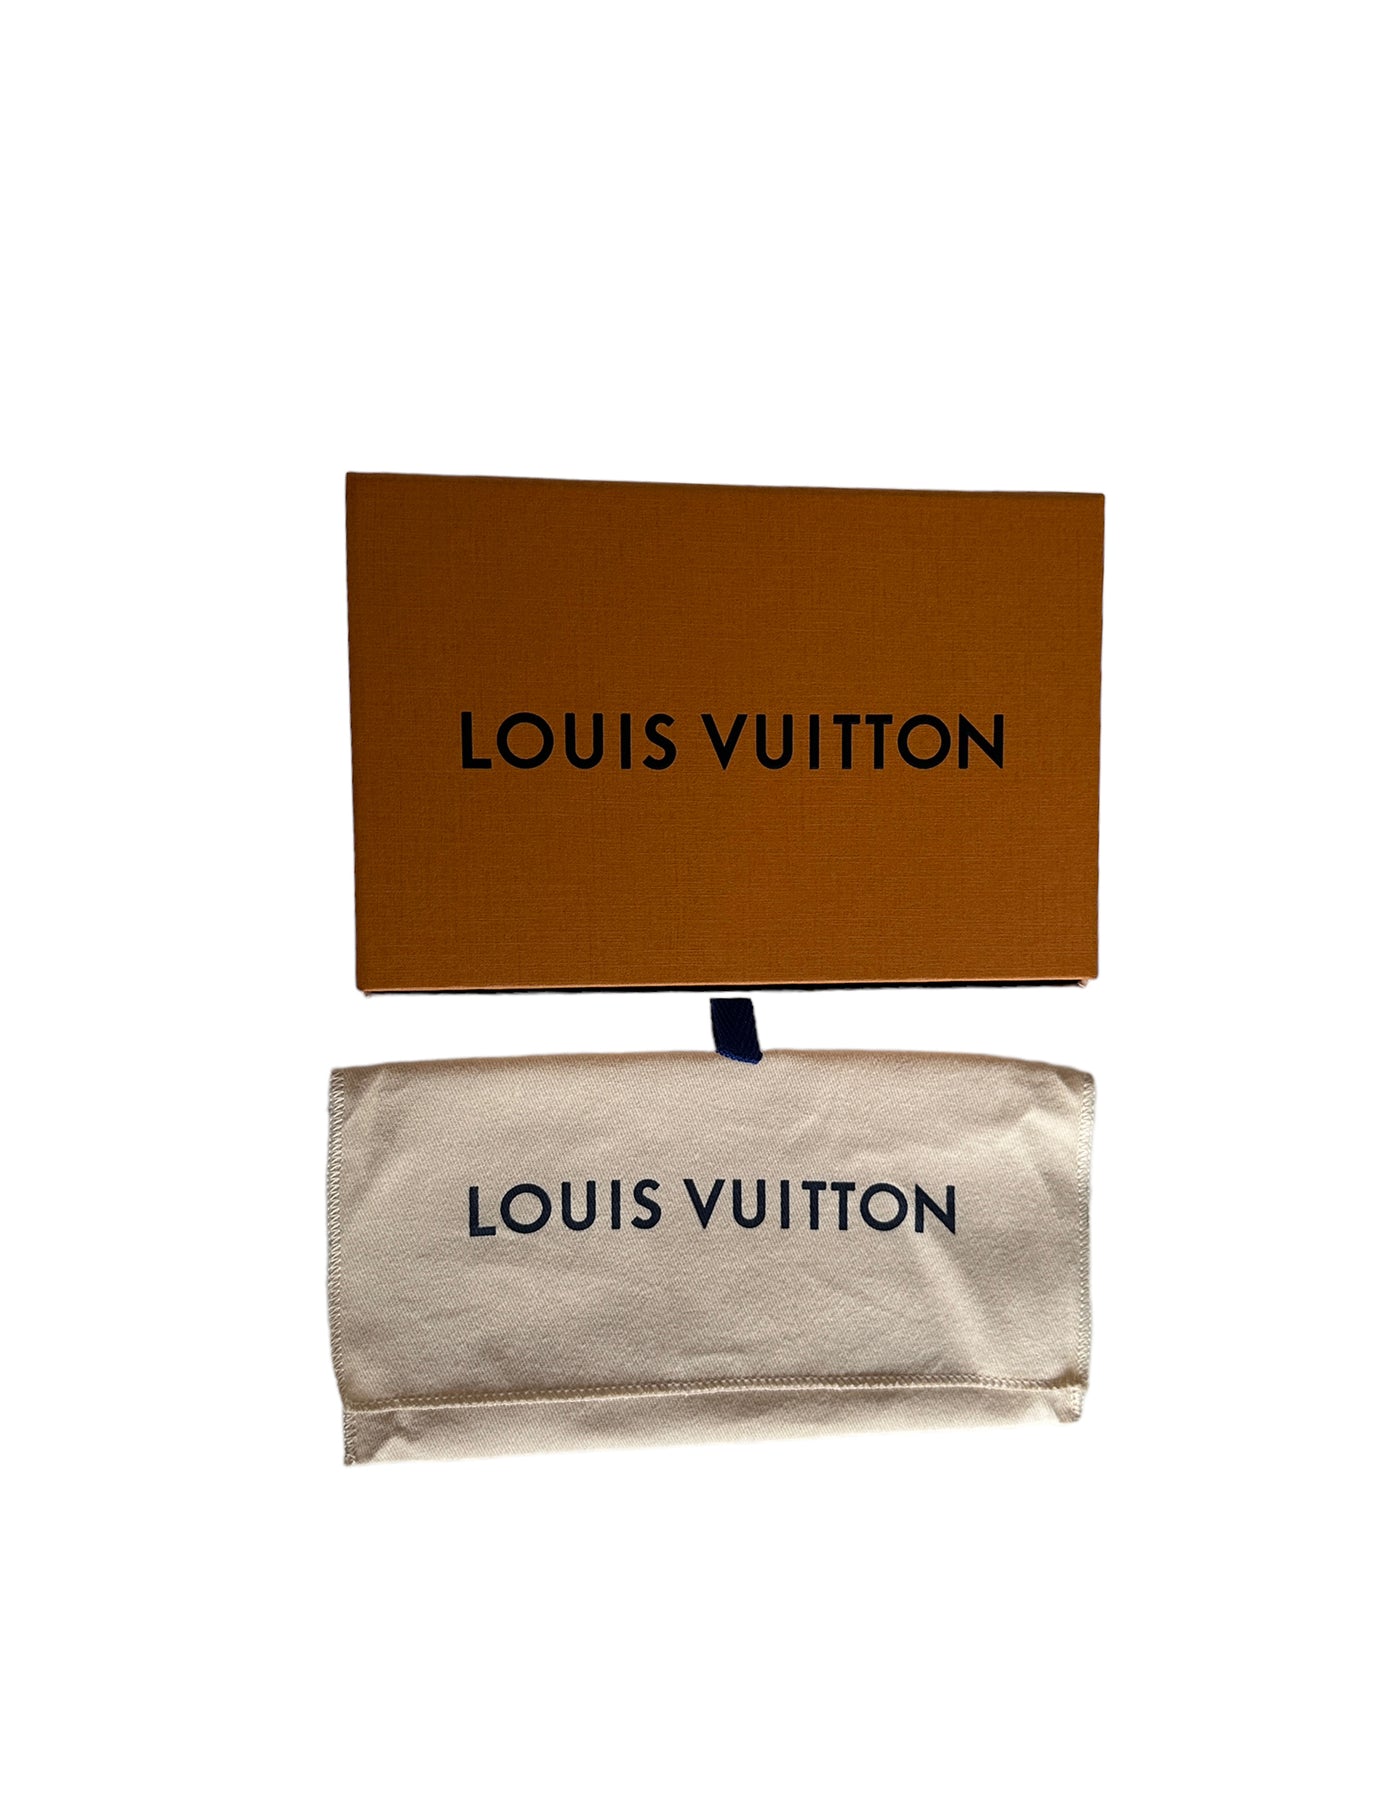 LOUIS VUITTON BY THE POOL LARGE ZIPPY WALLET MIST BRUME Giant